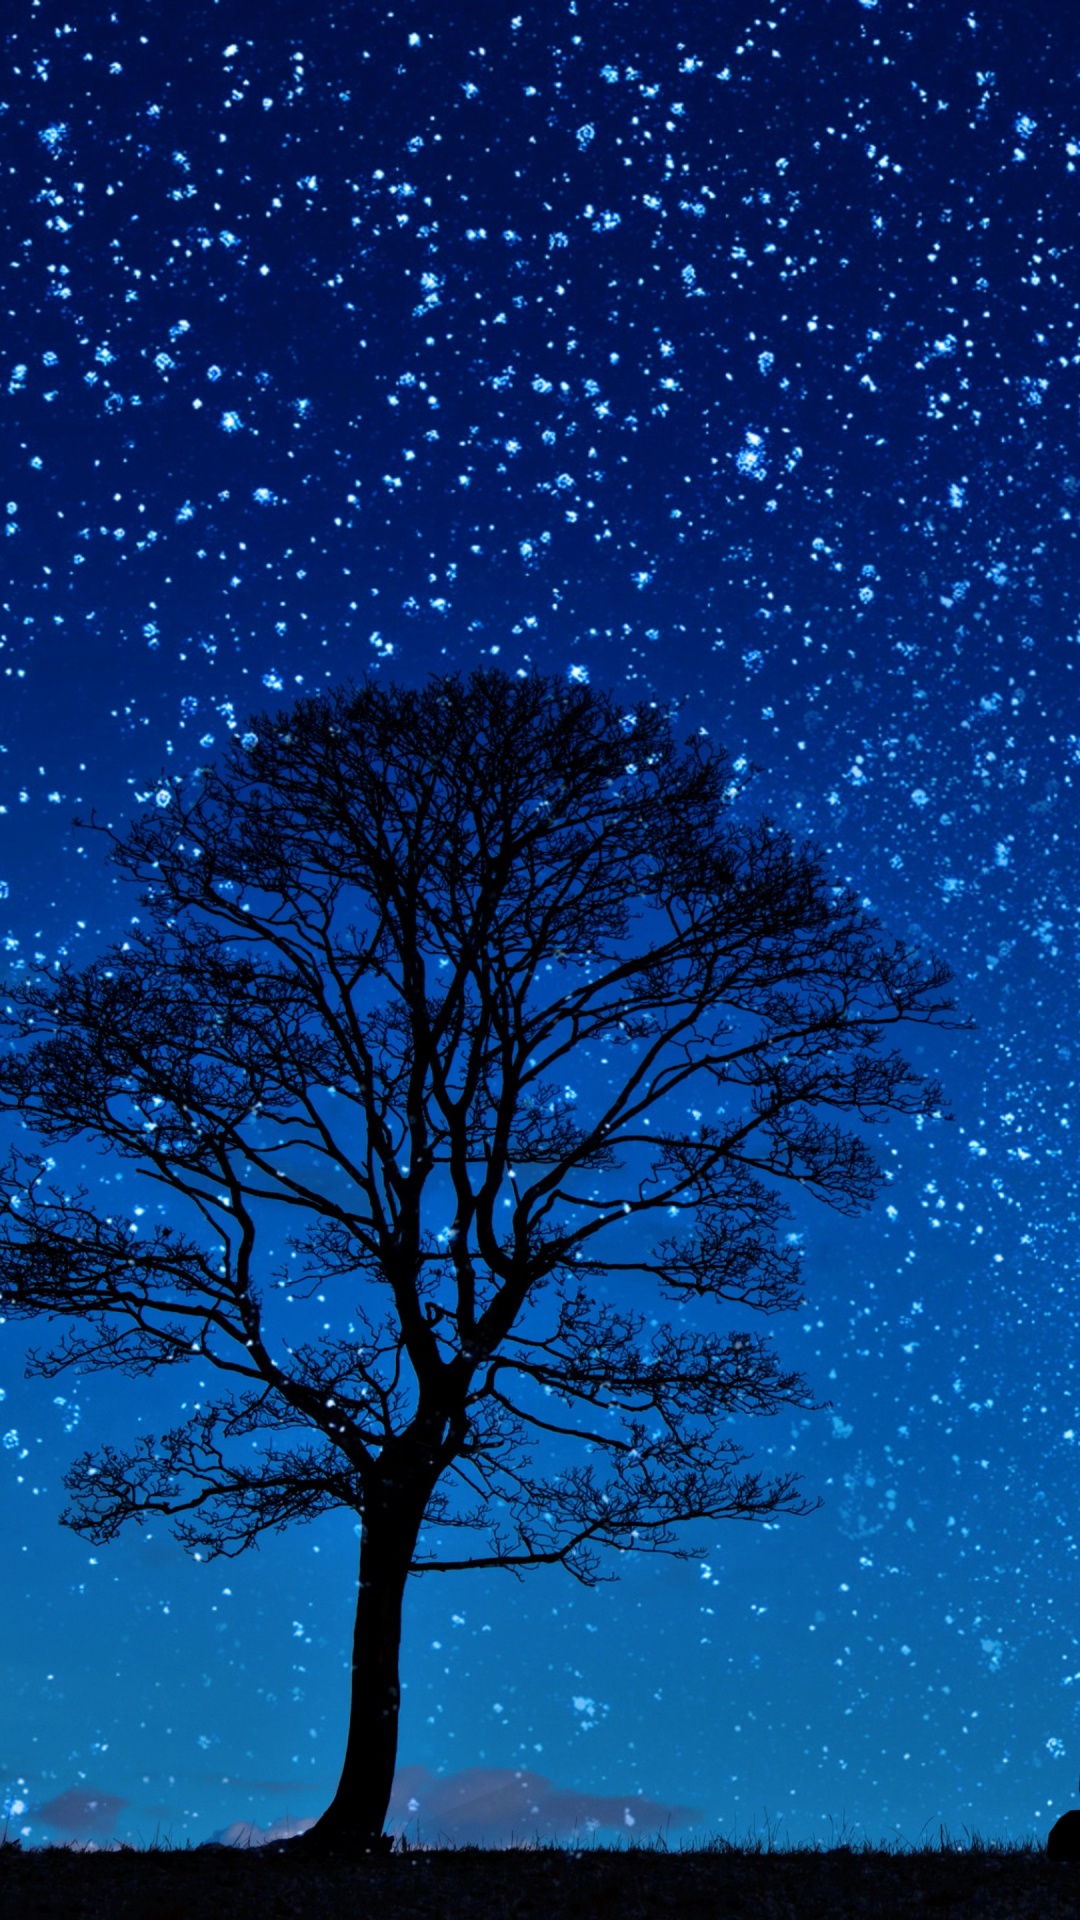 Silhouette of Man Standing Near Bare Tree Under Blue Sky During Night Time. Wallpaper in 1080x1920 Resolution